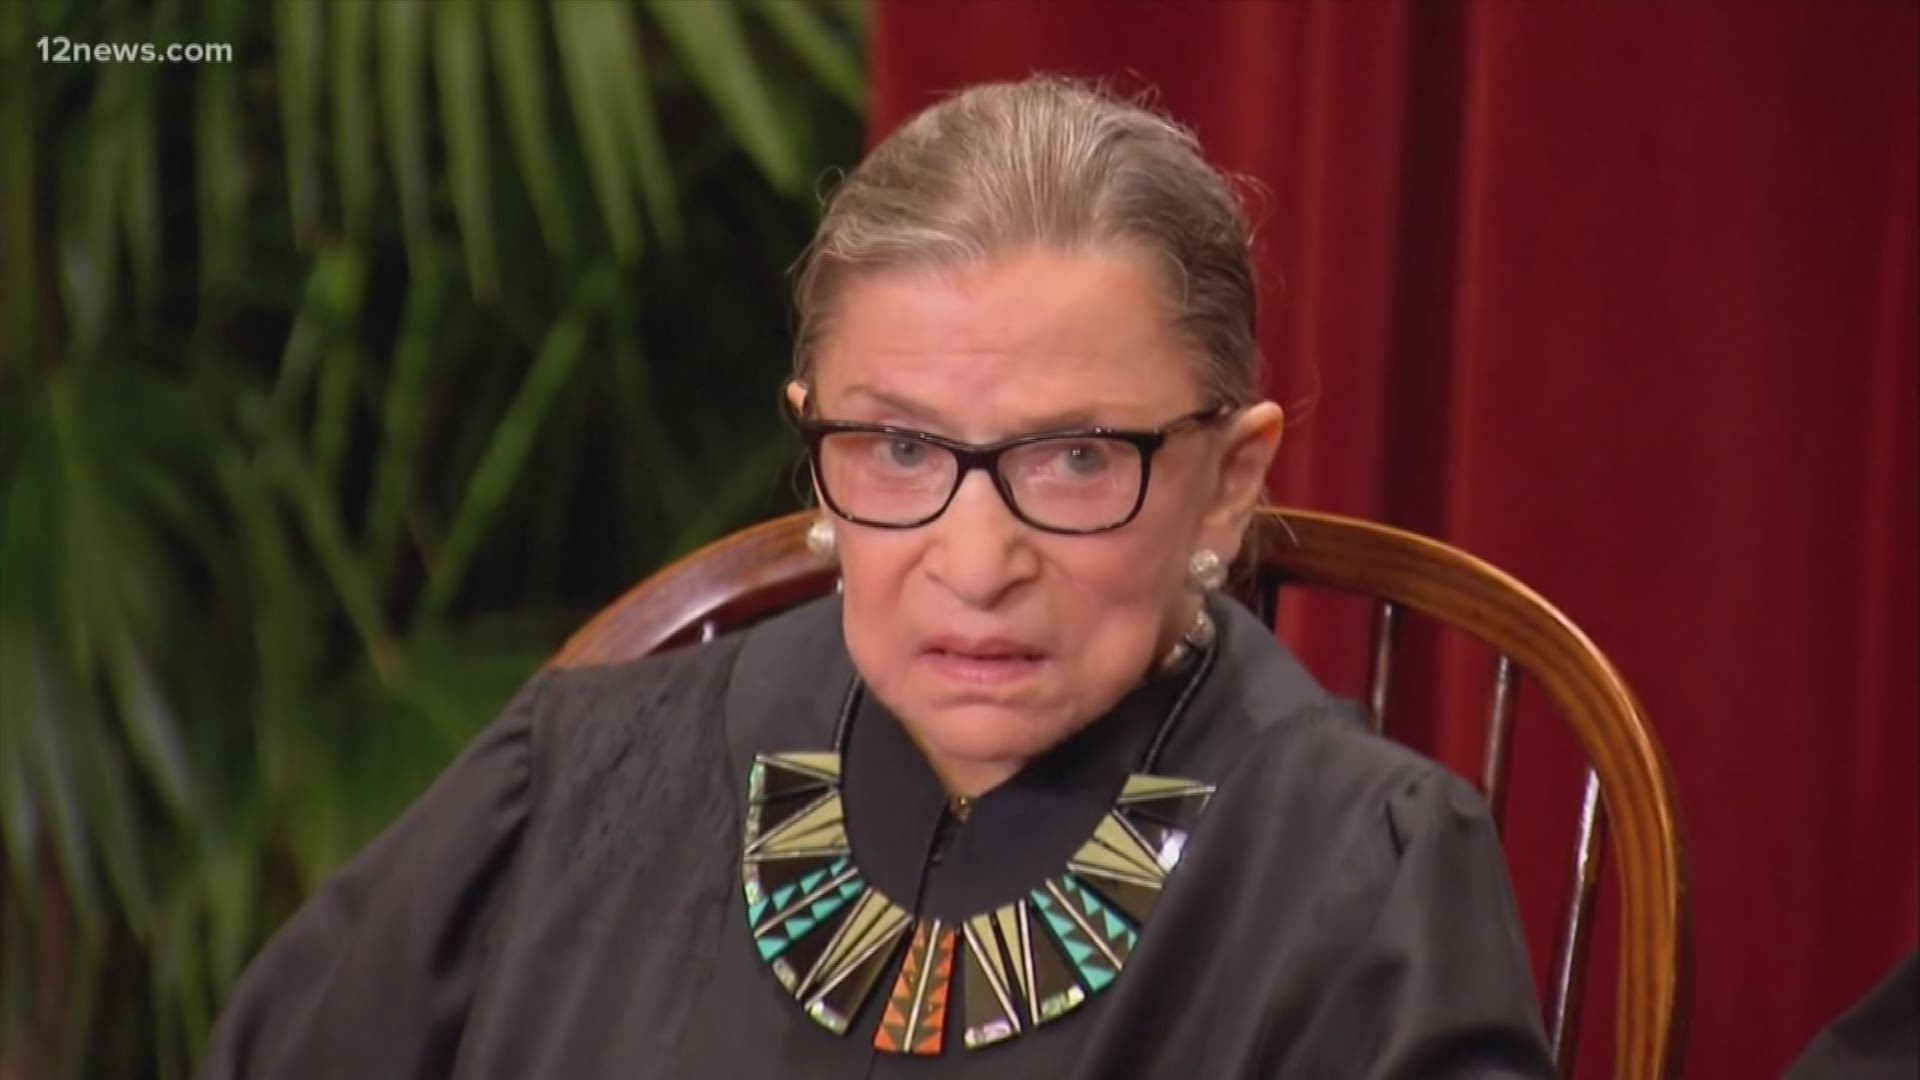 Supreme Court Justice Ruth Bader Ginsburg has had several health issues this year prompting some to wonder if she is fit to serve. We verify what the Constitution says about forcing justices to retire.